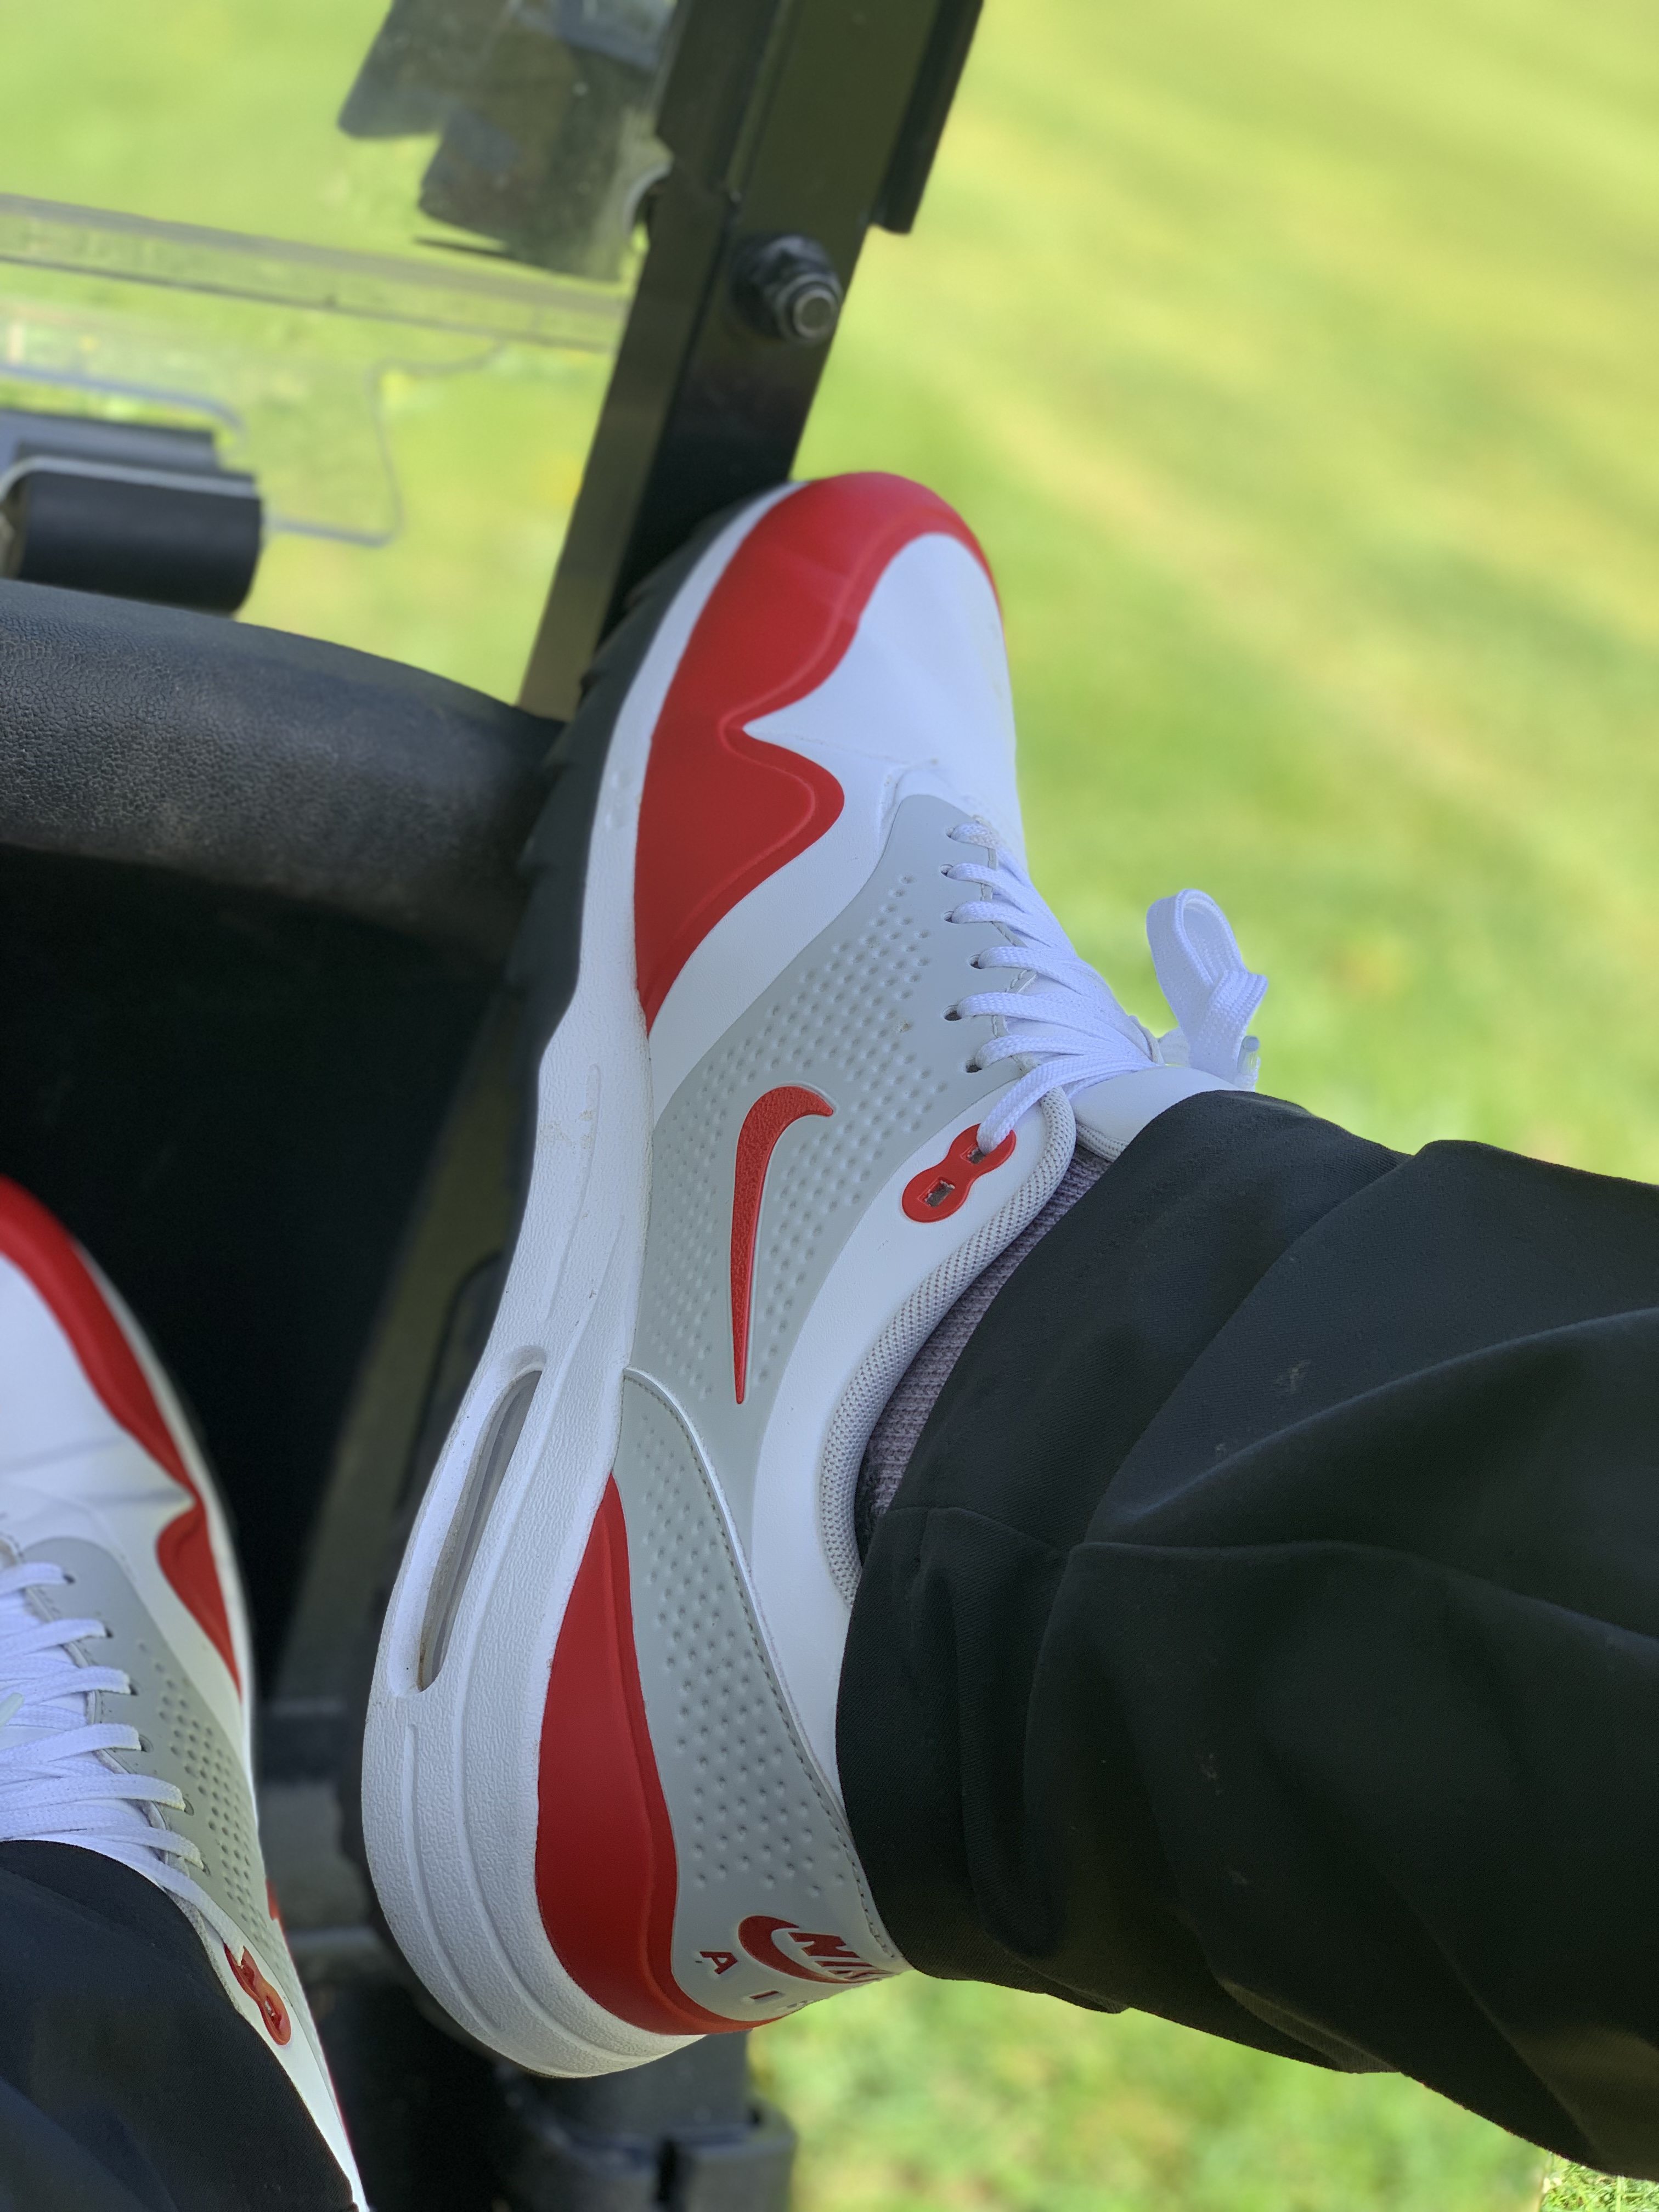 Nike Air Max 1 G Golf Shoe Review: Stylish on and off the course